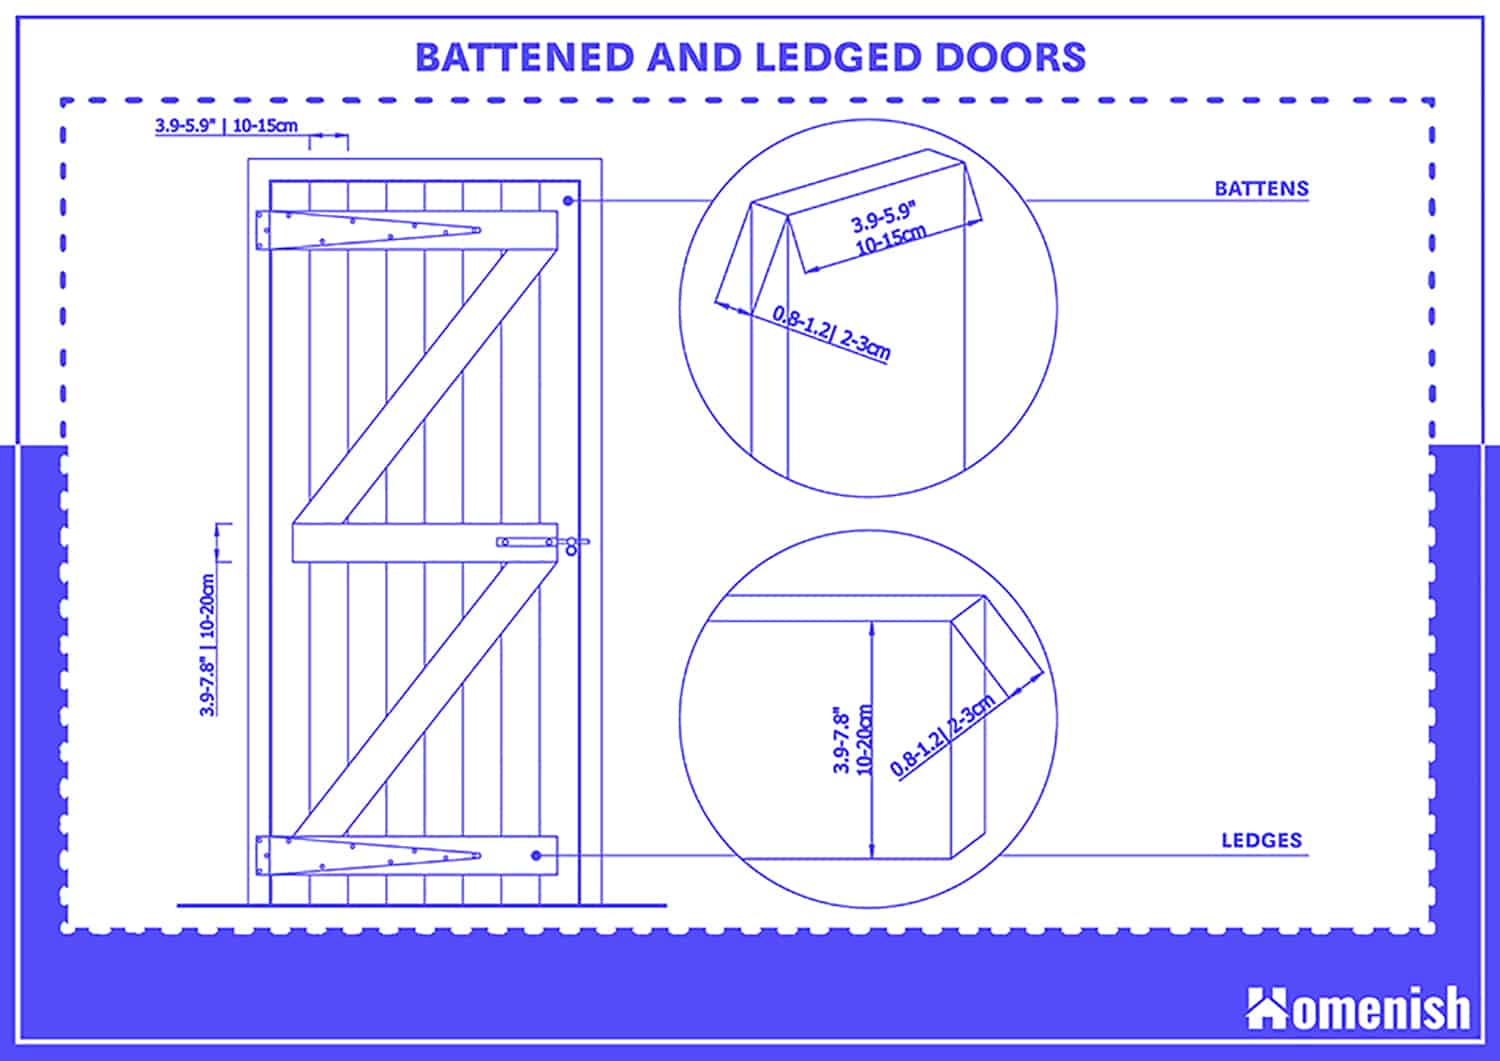 Battened and Ledged Doors